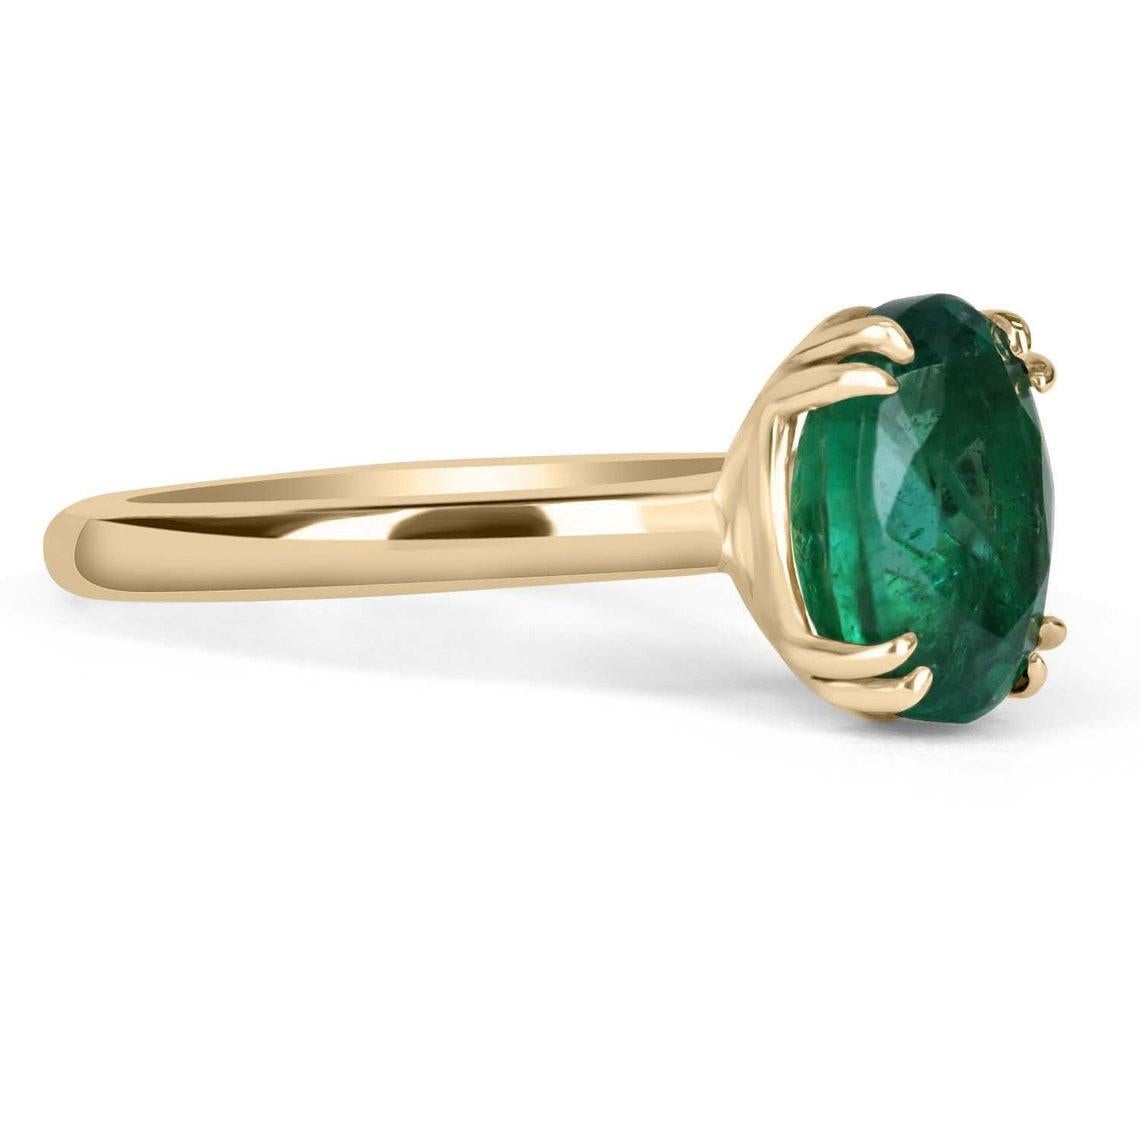 Displayed is a custom emerald solitaire oval-cut engagement/right-hand ring in 14K yellow gold. This gorgeous solitaire ring carries a 3.25-carat emerald in a 4, double prong setting. The emerald has very good clarity with minor flaws that are